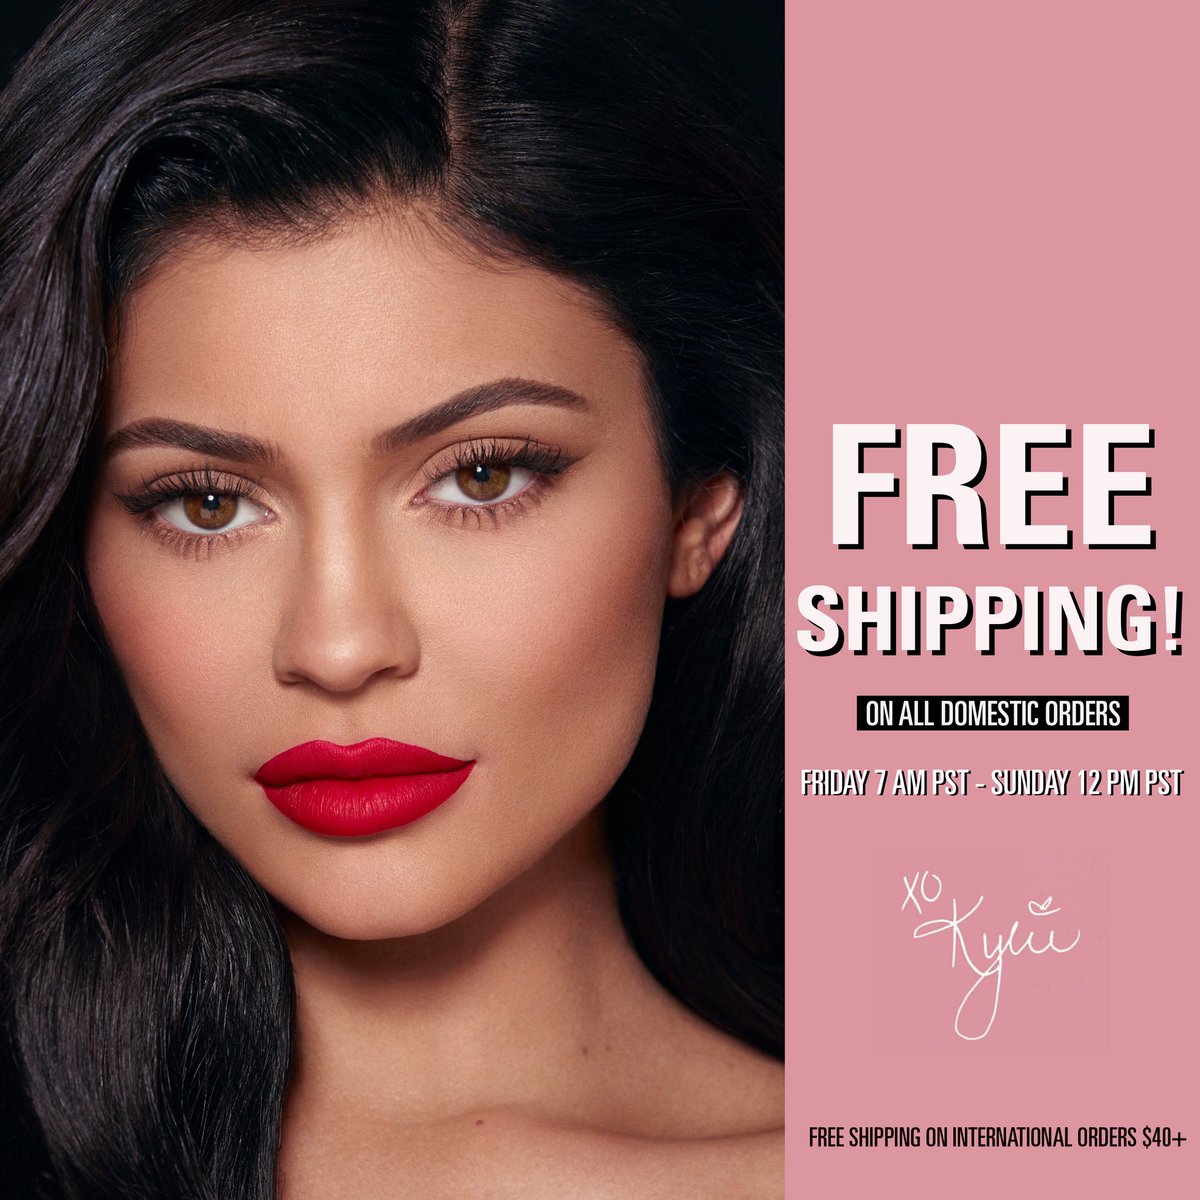 FREE SHIPPING starts now! https://t.co/bDaiohhXCV ends Sunday at 12pm pst ???????? @kyliecosmetics https://t.co/1LuQ9Dmbli